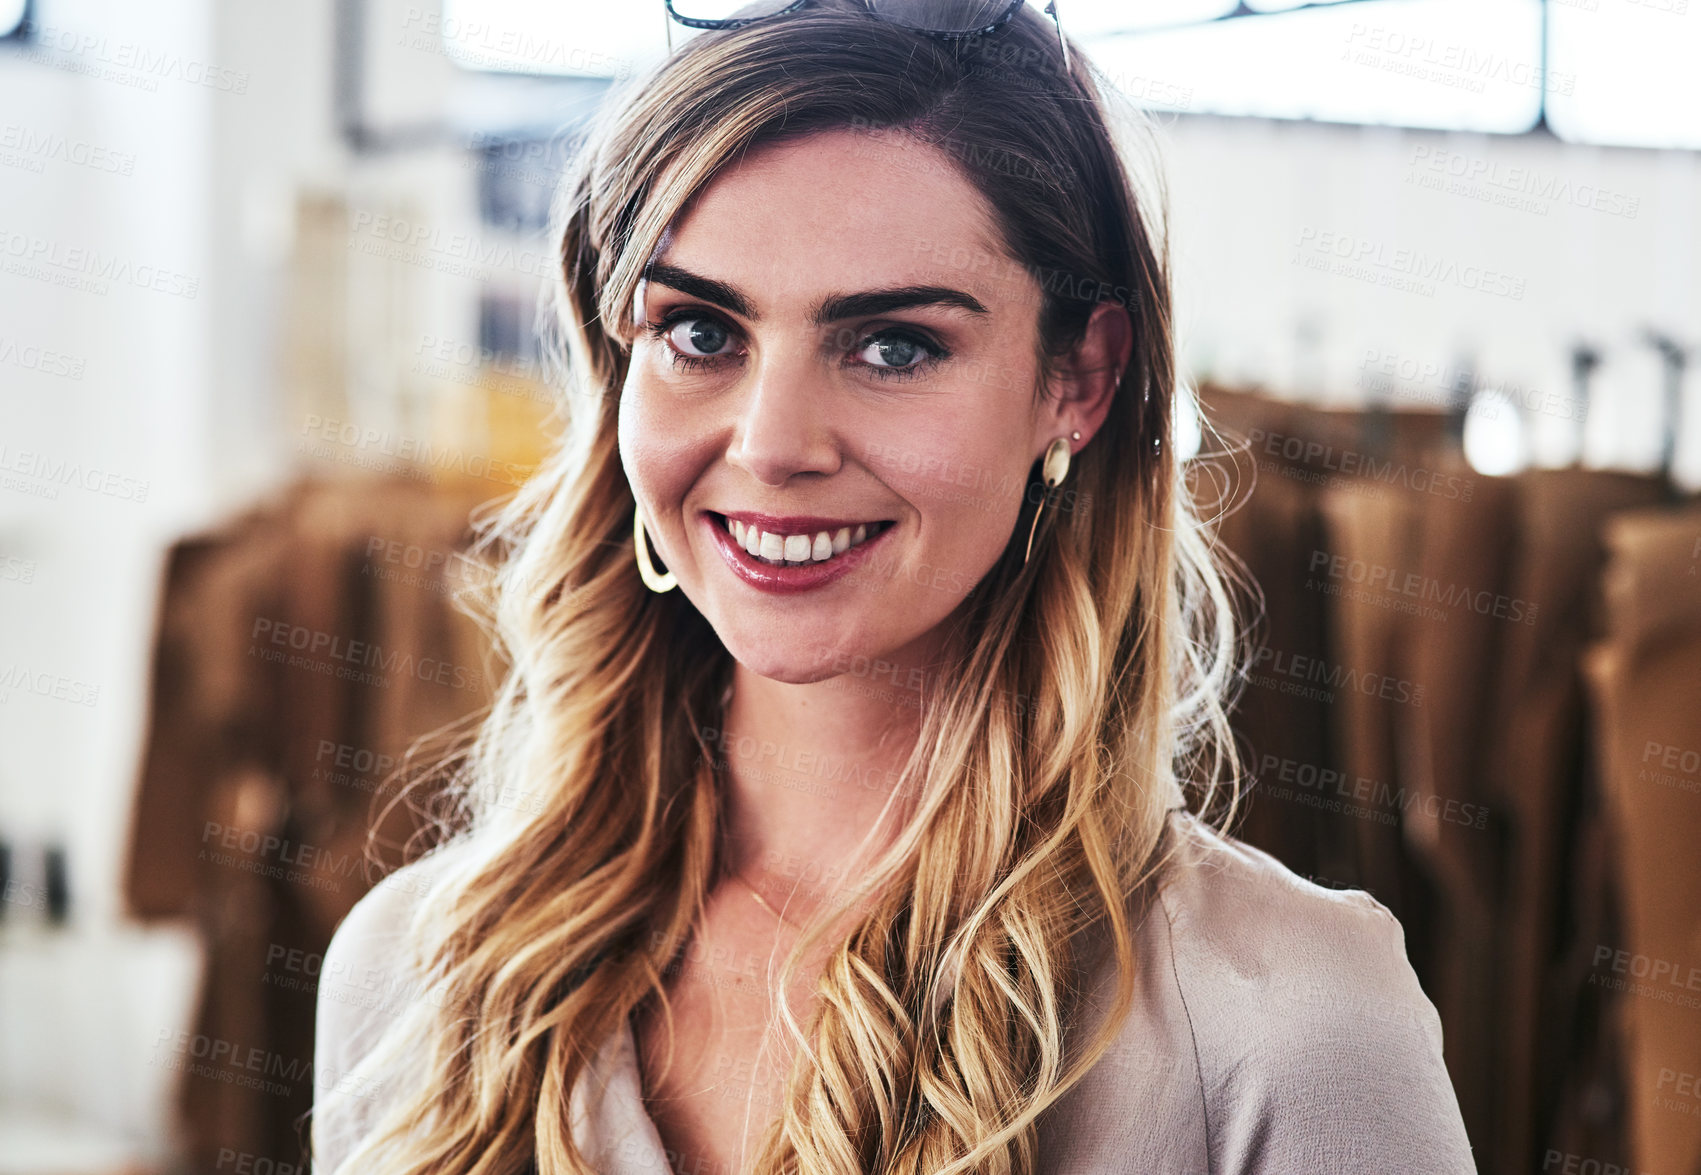 Buy stock photo Portrait of a young fashion designer standing in her workshop